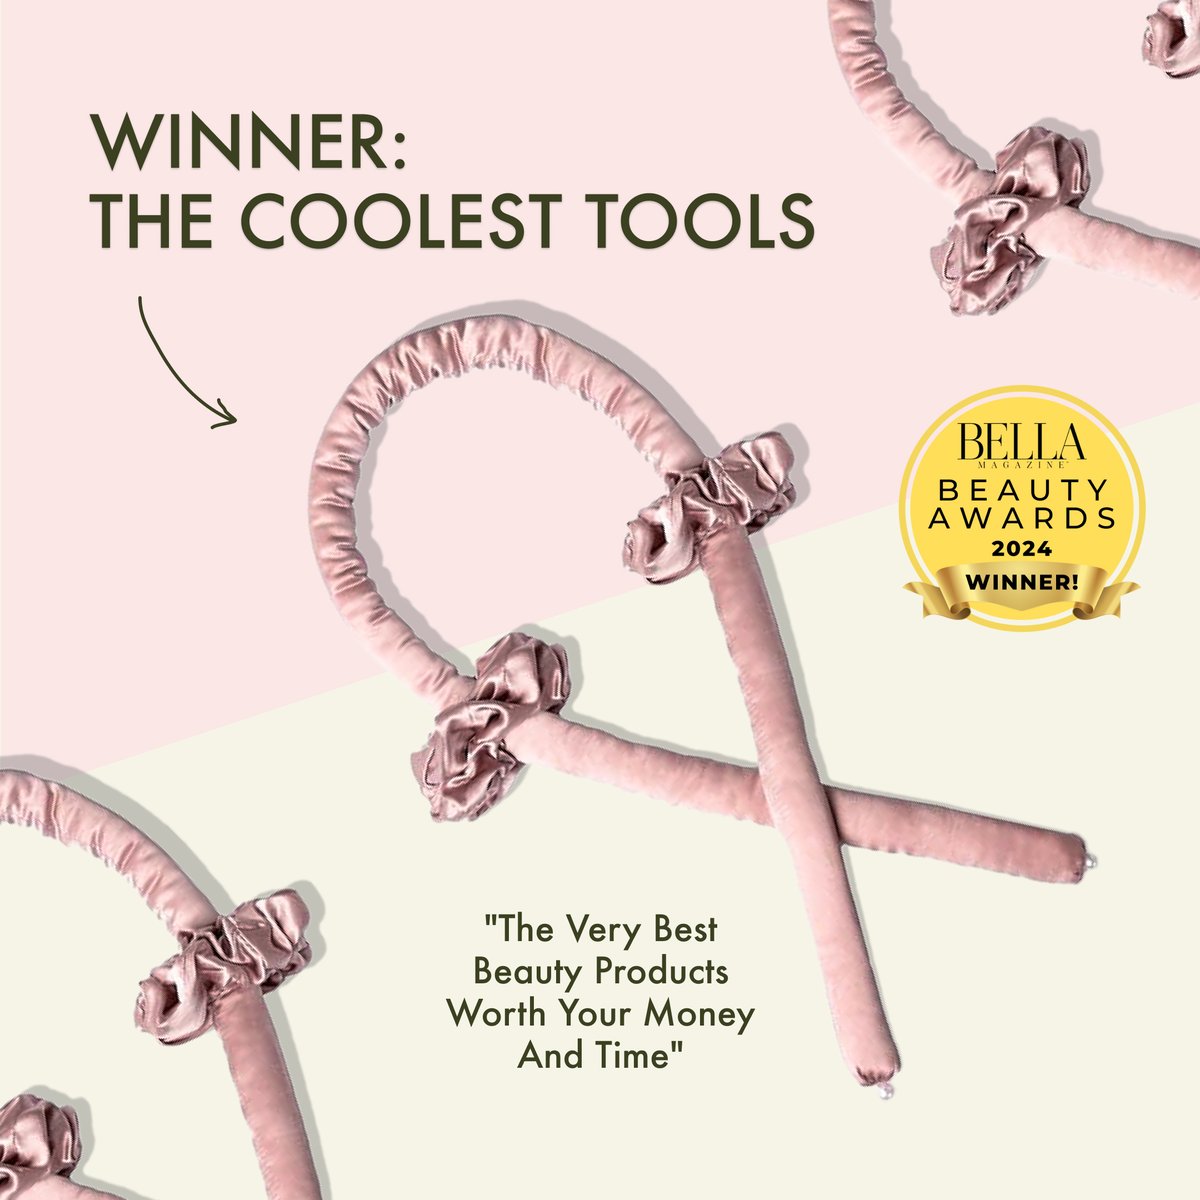 Do you hear that? LILYSILK Heatless Silk Curling Headband and Scrunchie Set is another WINNER! Proud to announce that we are among the Coolest Tools at the 2024 BELLA Beauty Awards! Thank you @bellamediaco for this incredible honor. #lilysilk #Livespectacularly